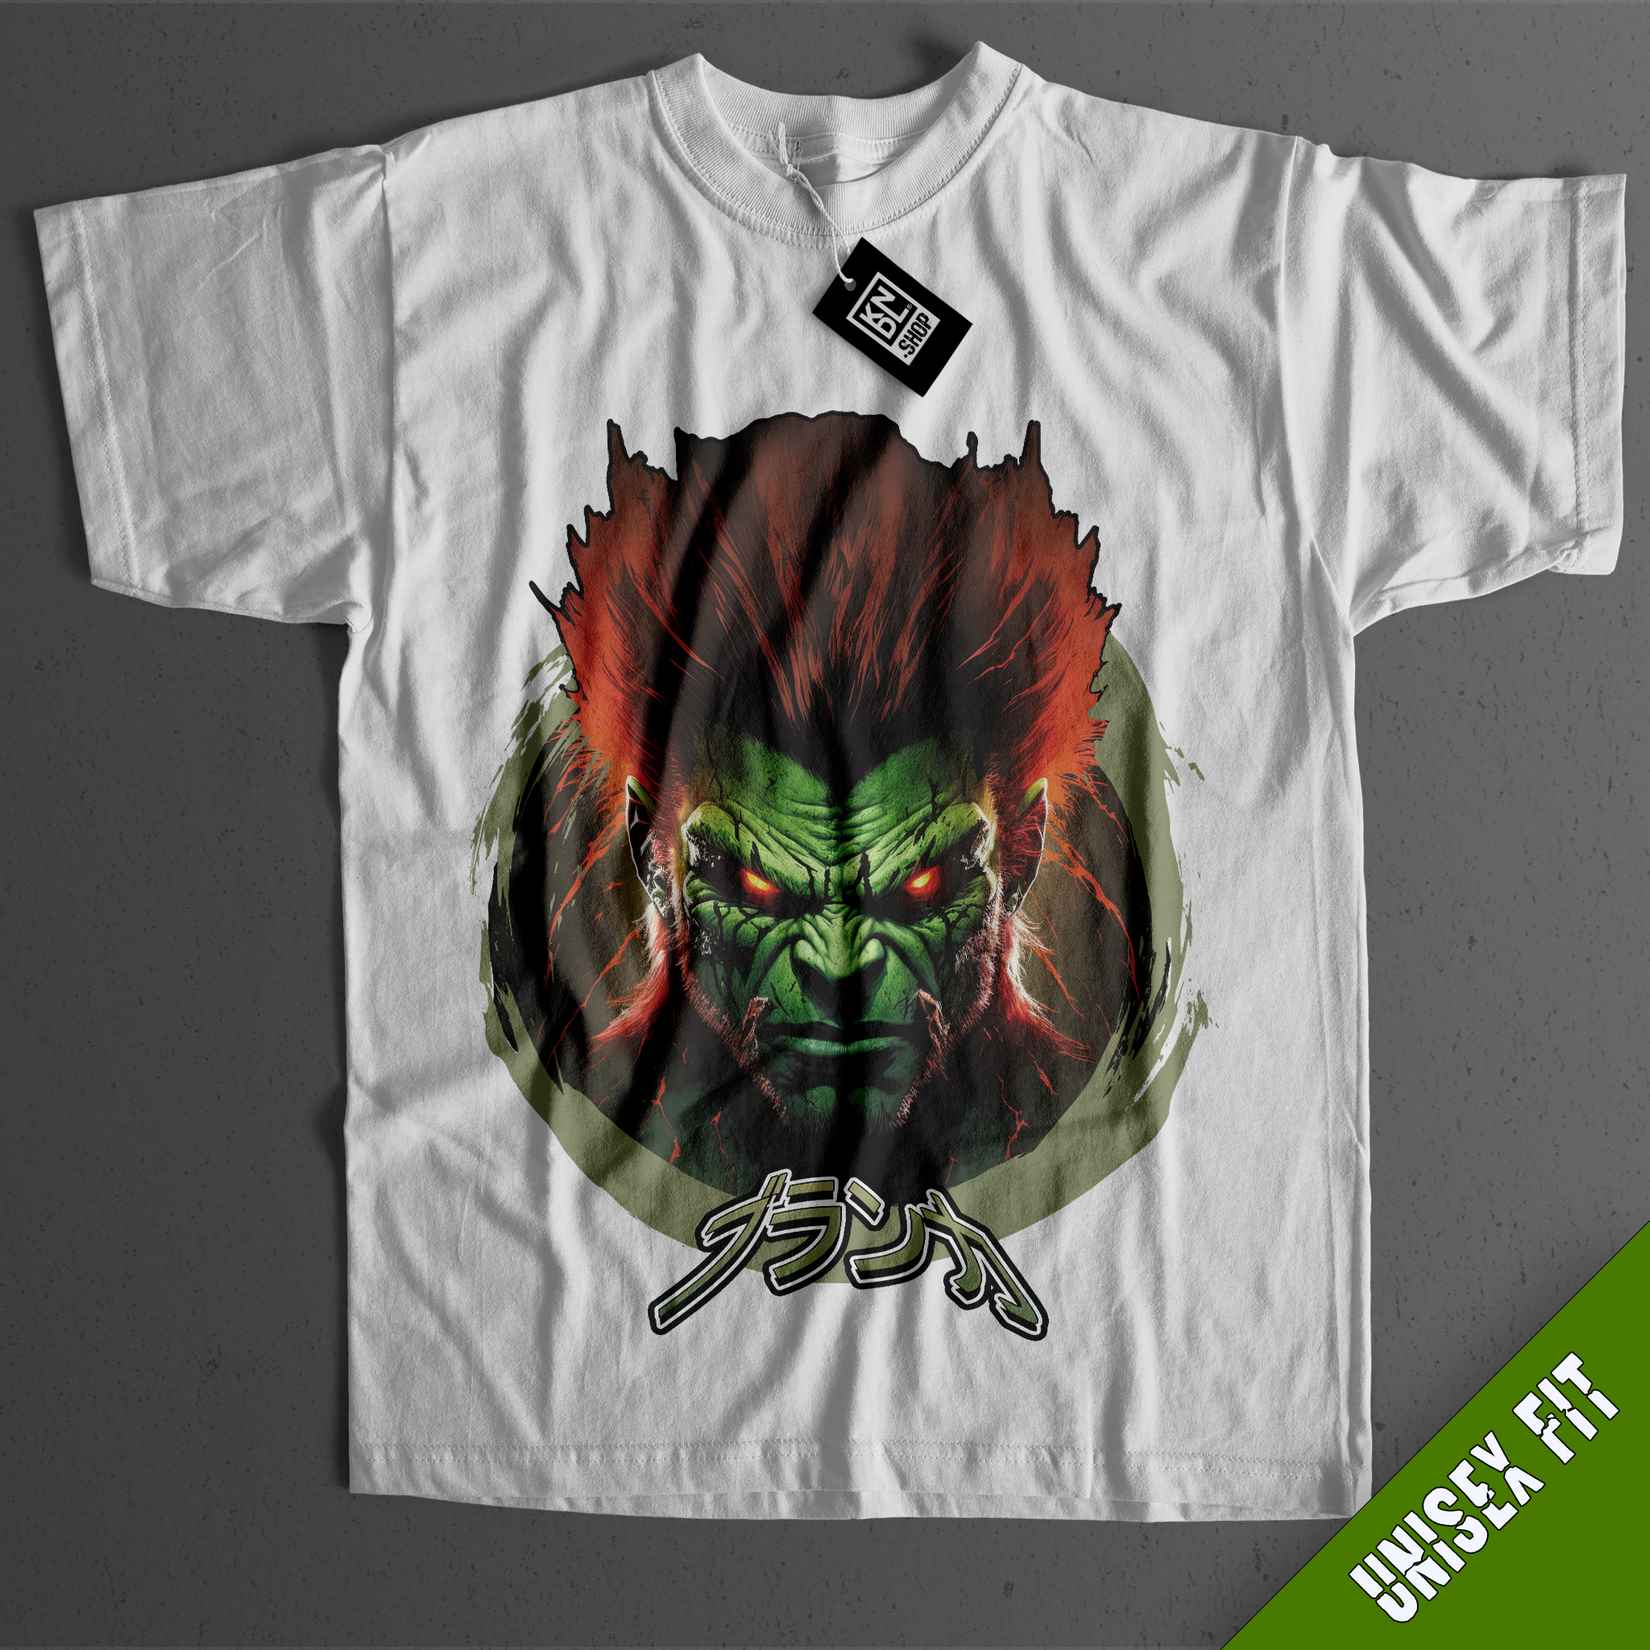 a white t - shirt with an image of a demon on it